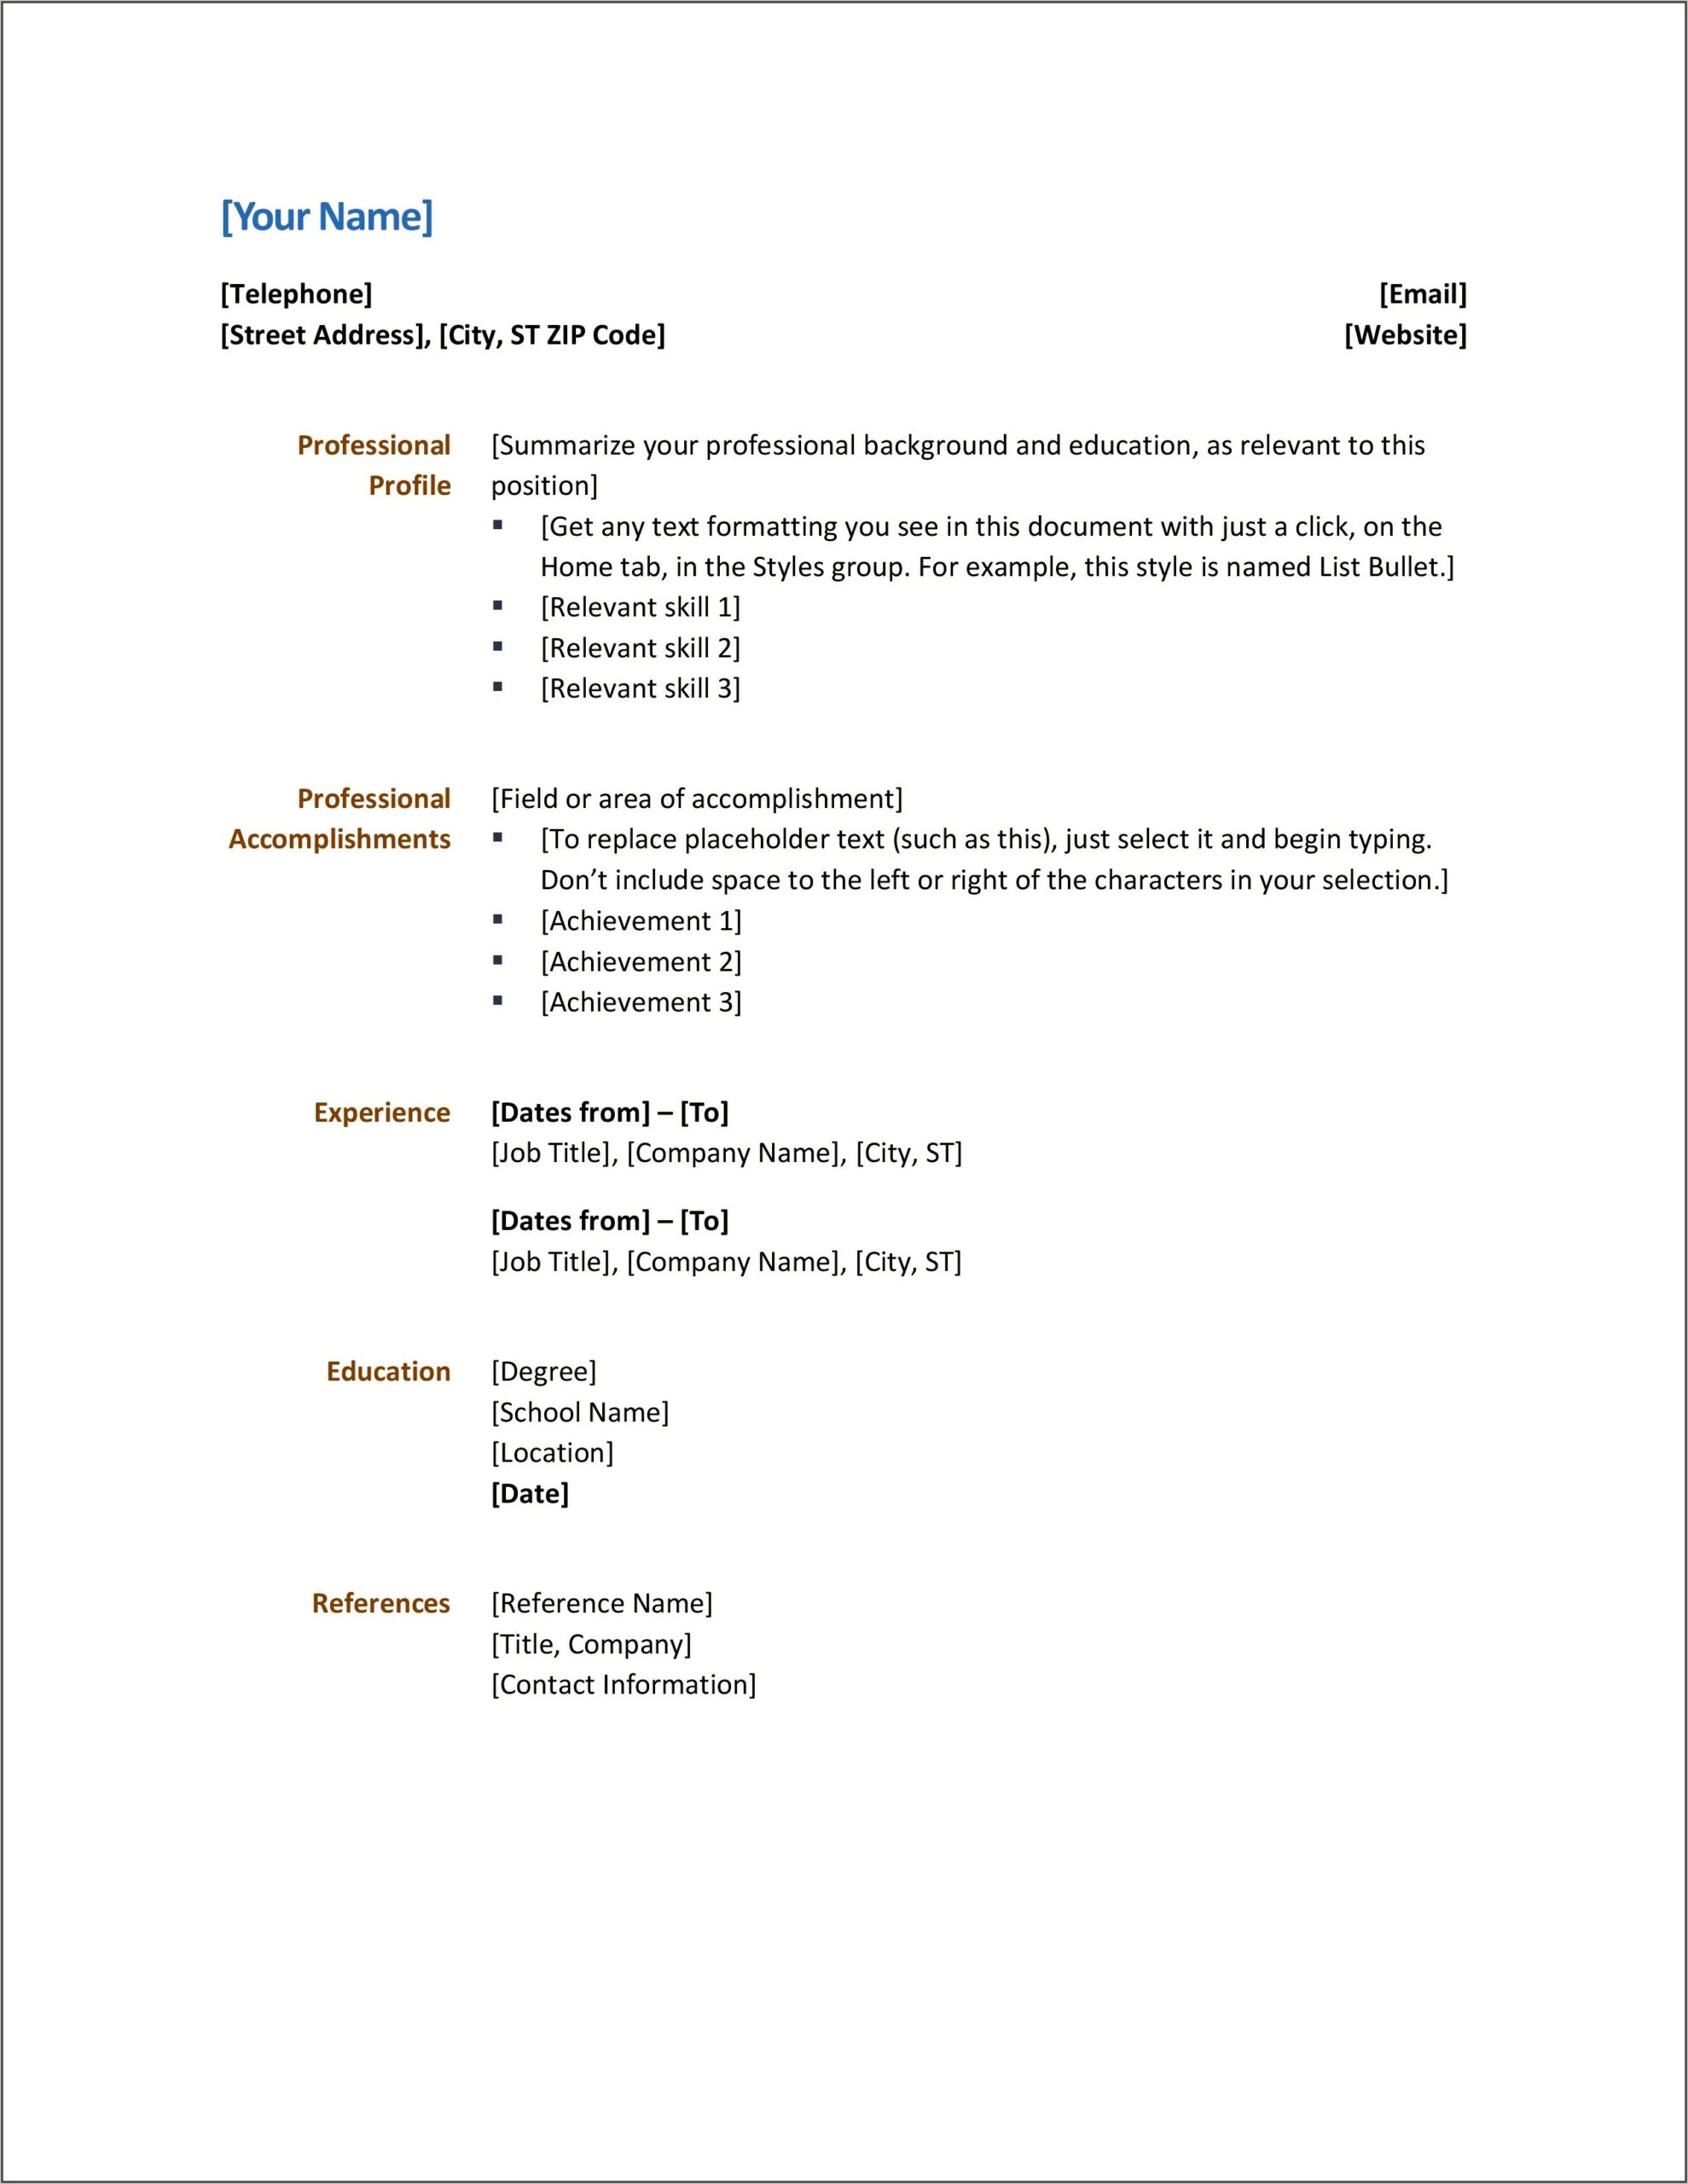 Resume Samples For Word 2007